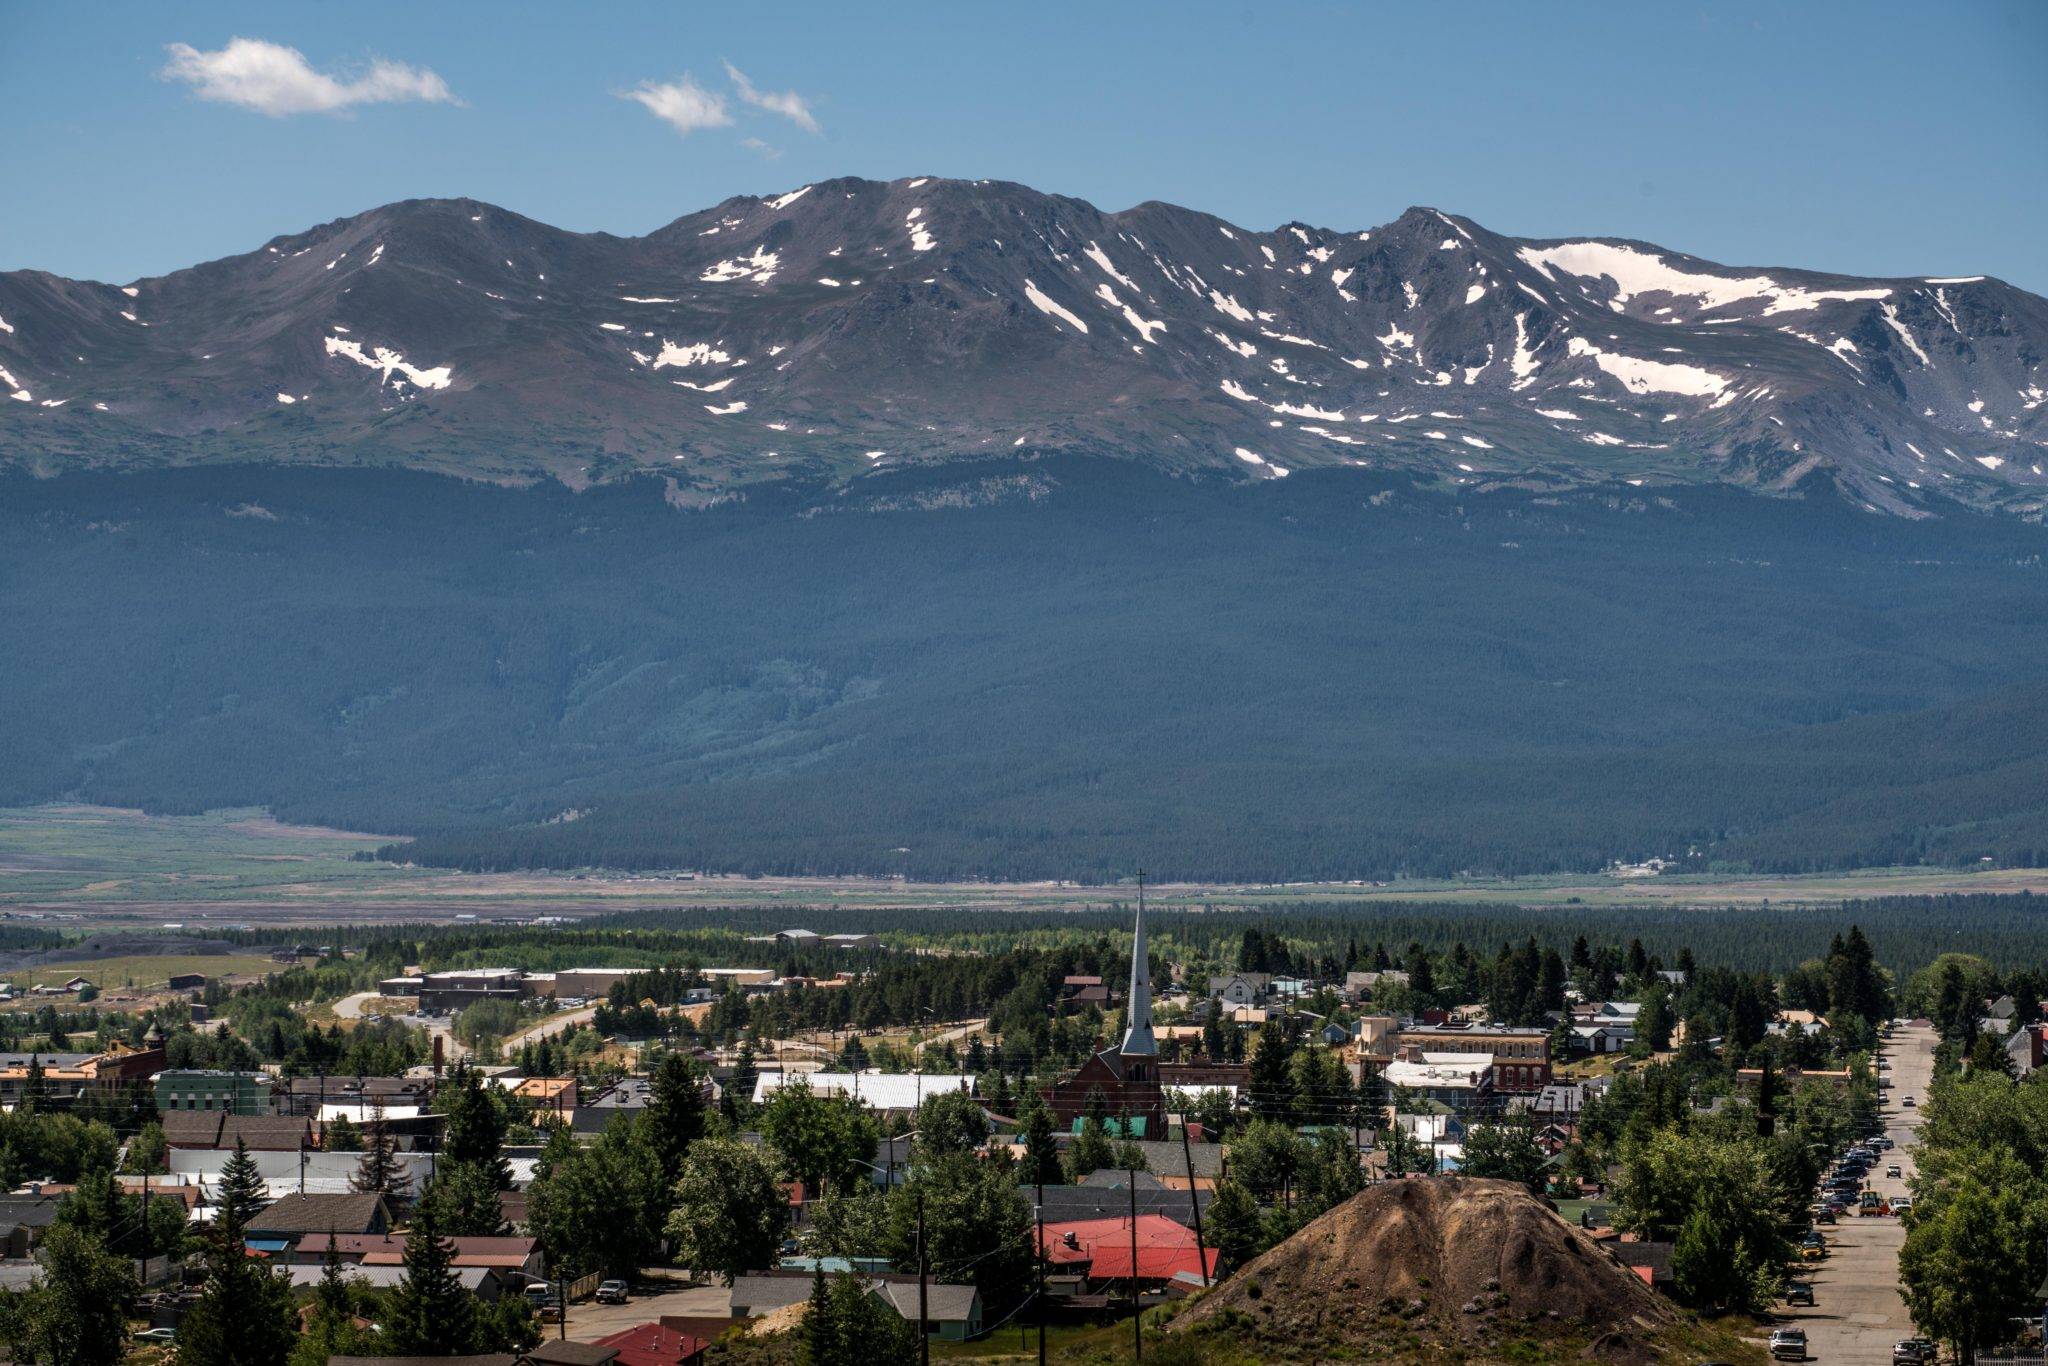 Mountain Range with town in foreground